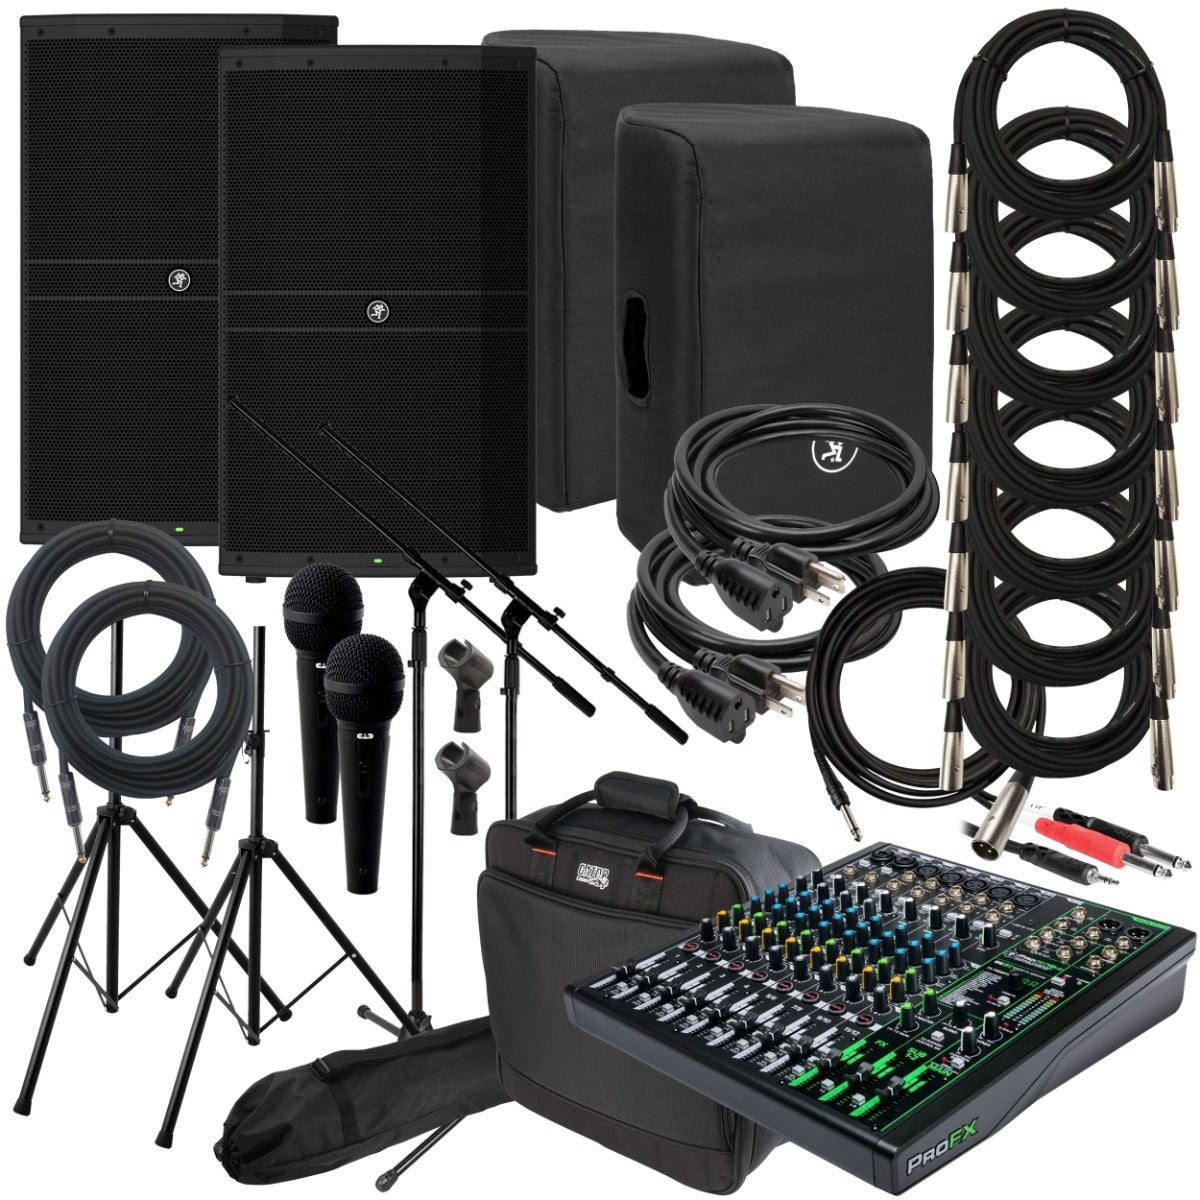 Collage of the Mackie DRM215 Powered Loudspeaker COMPLETE AUDIO BUNDLE showing included components